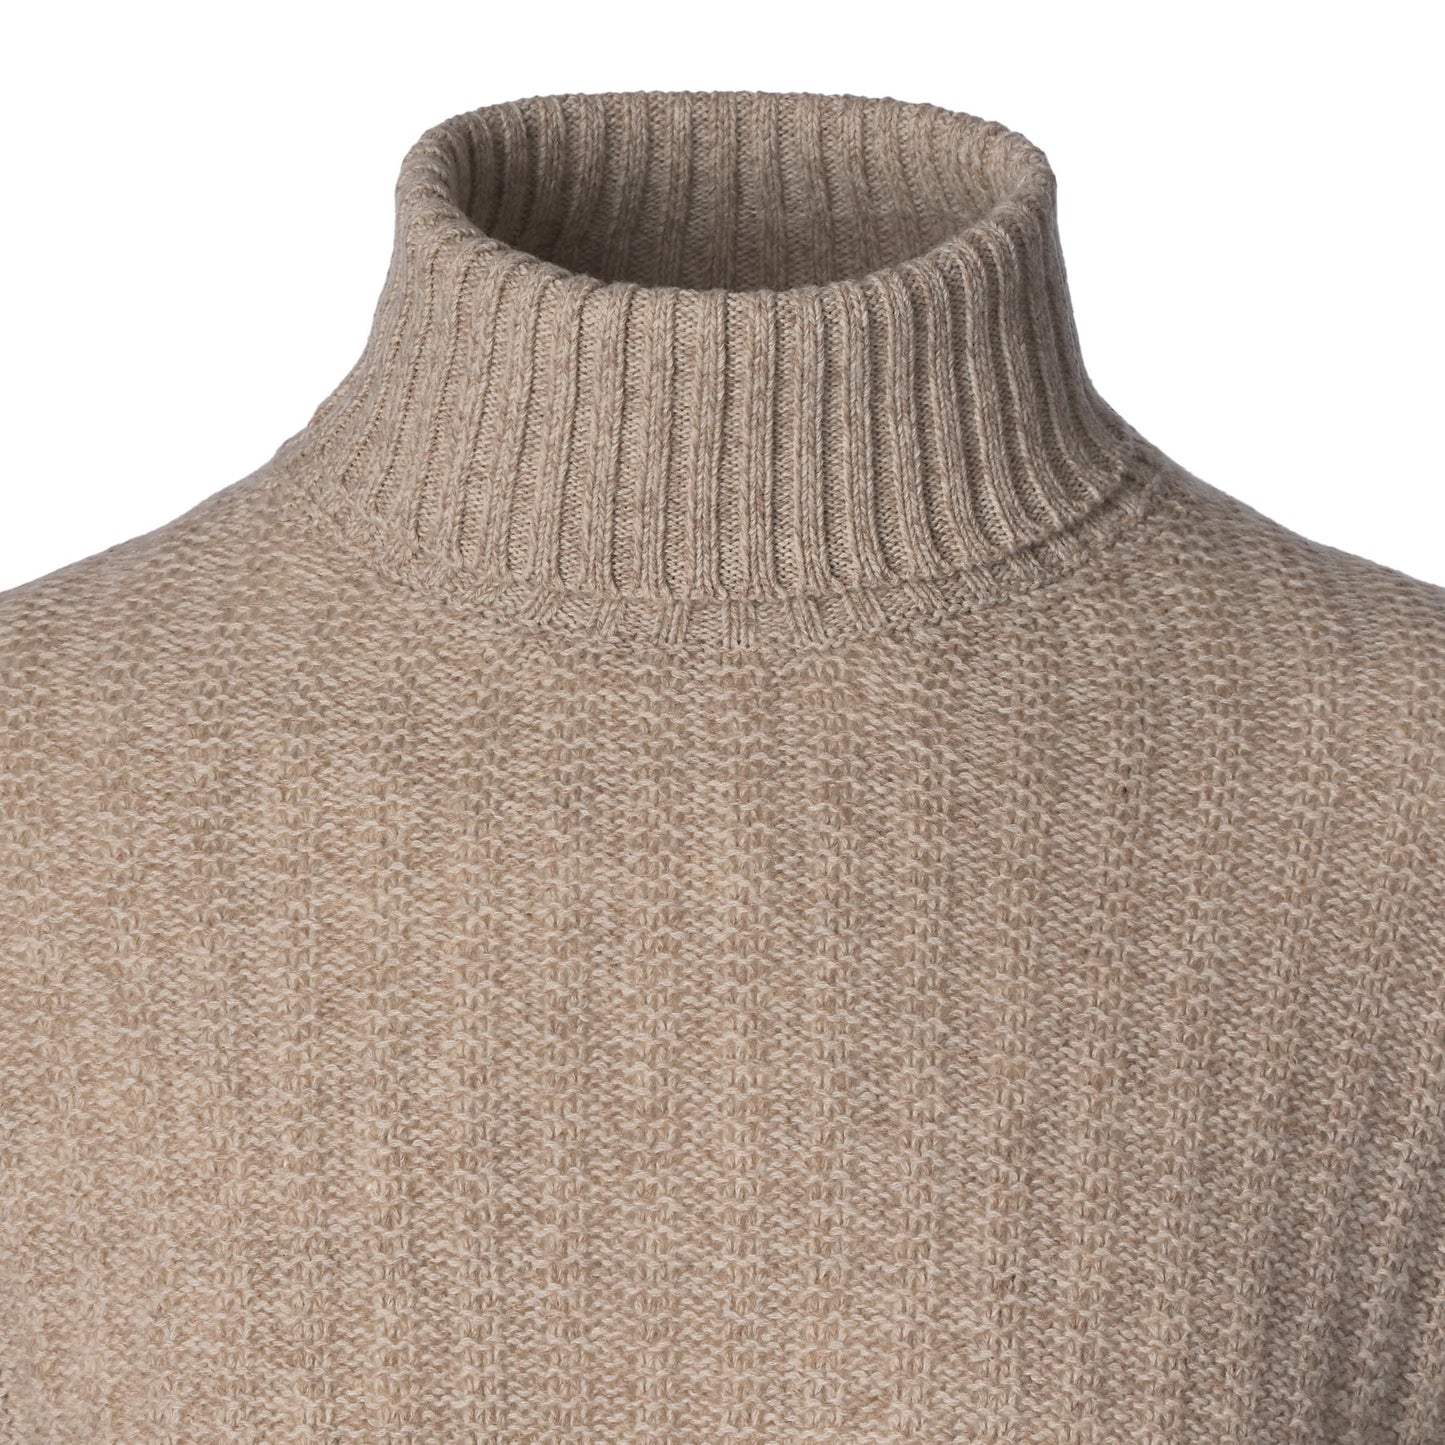 Fioroni Wool and Cashmere - Blend Rollneck Sweater - SARTALE